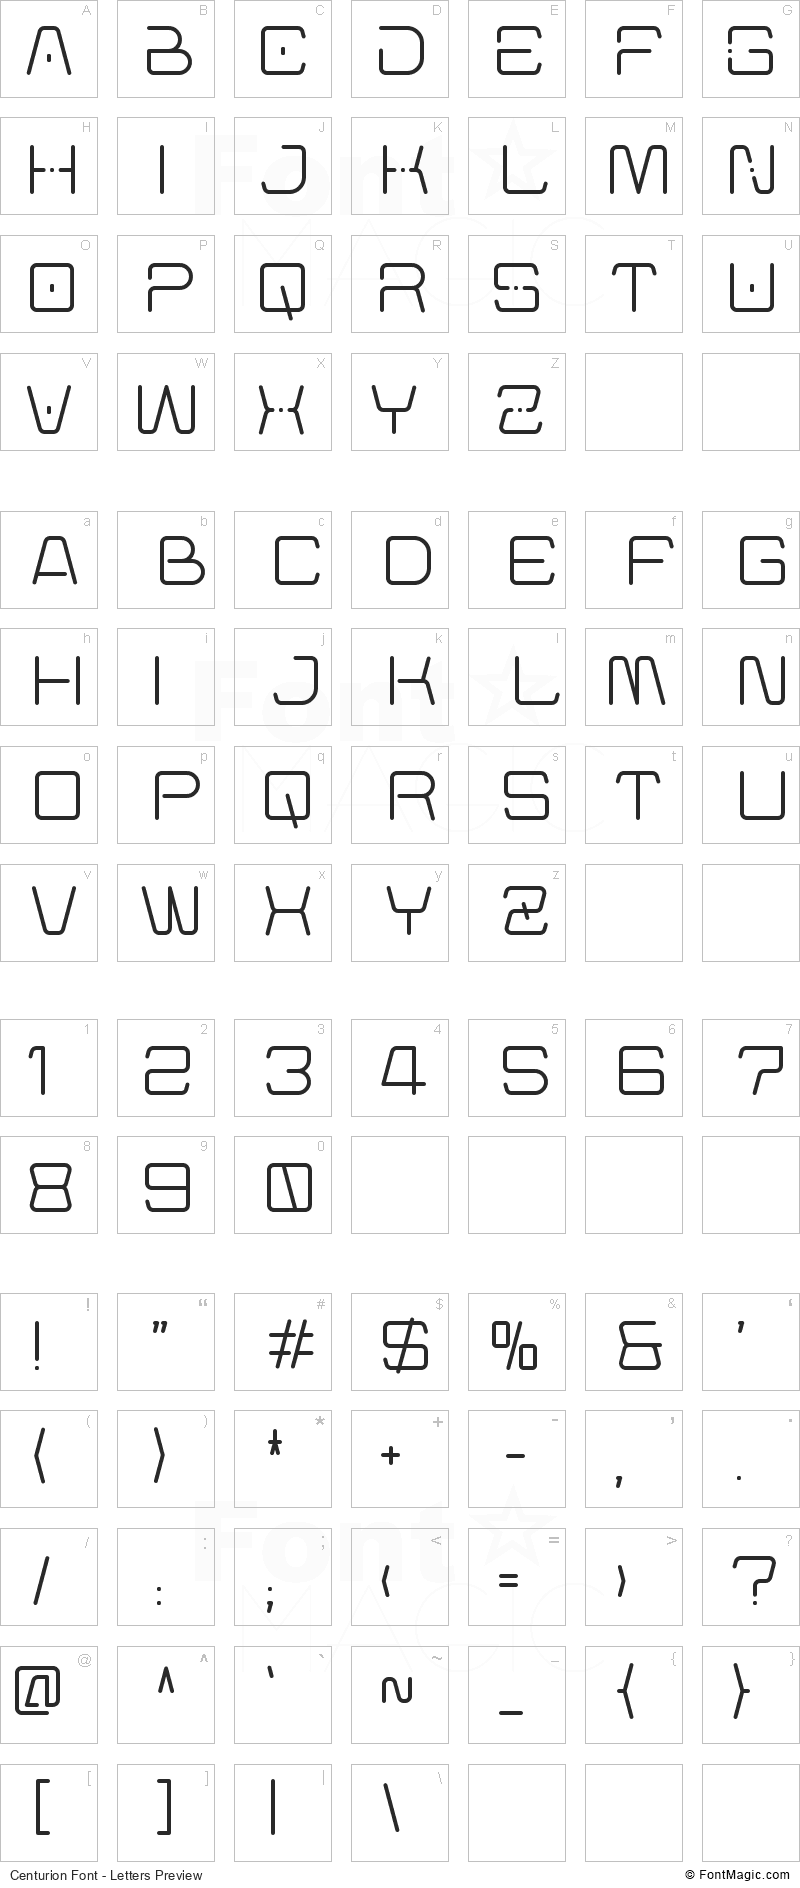 Centurion Font - All Latters Preview Chart